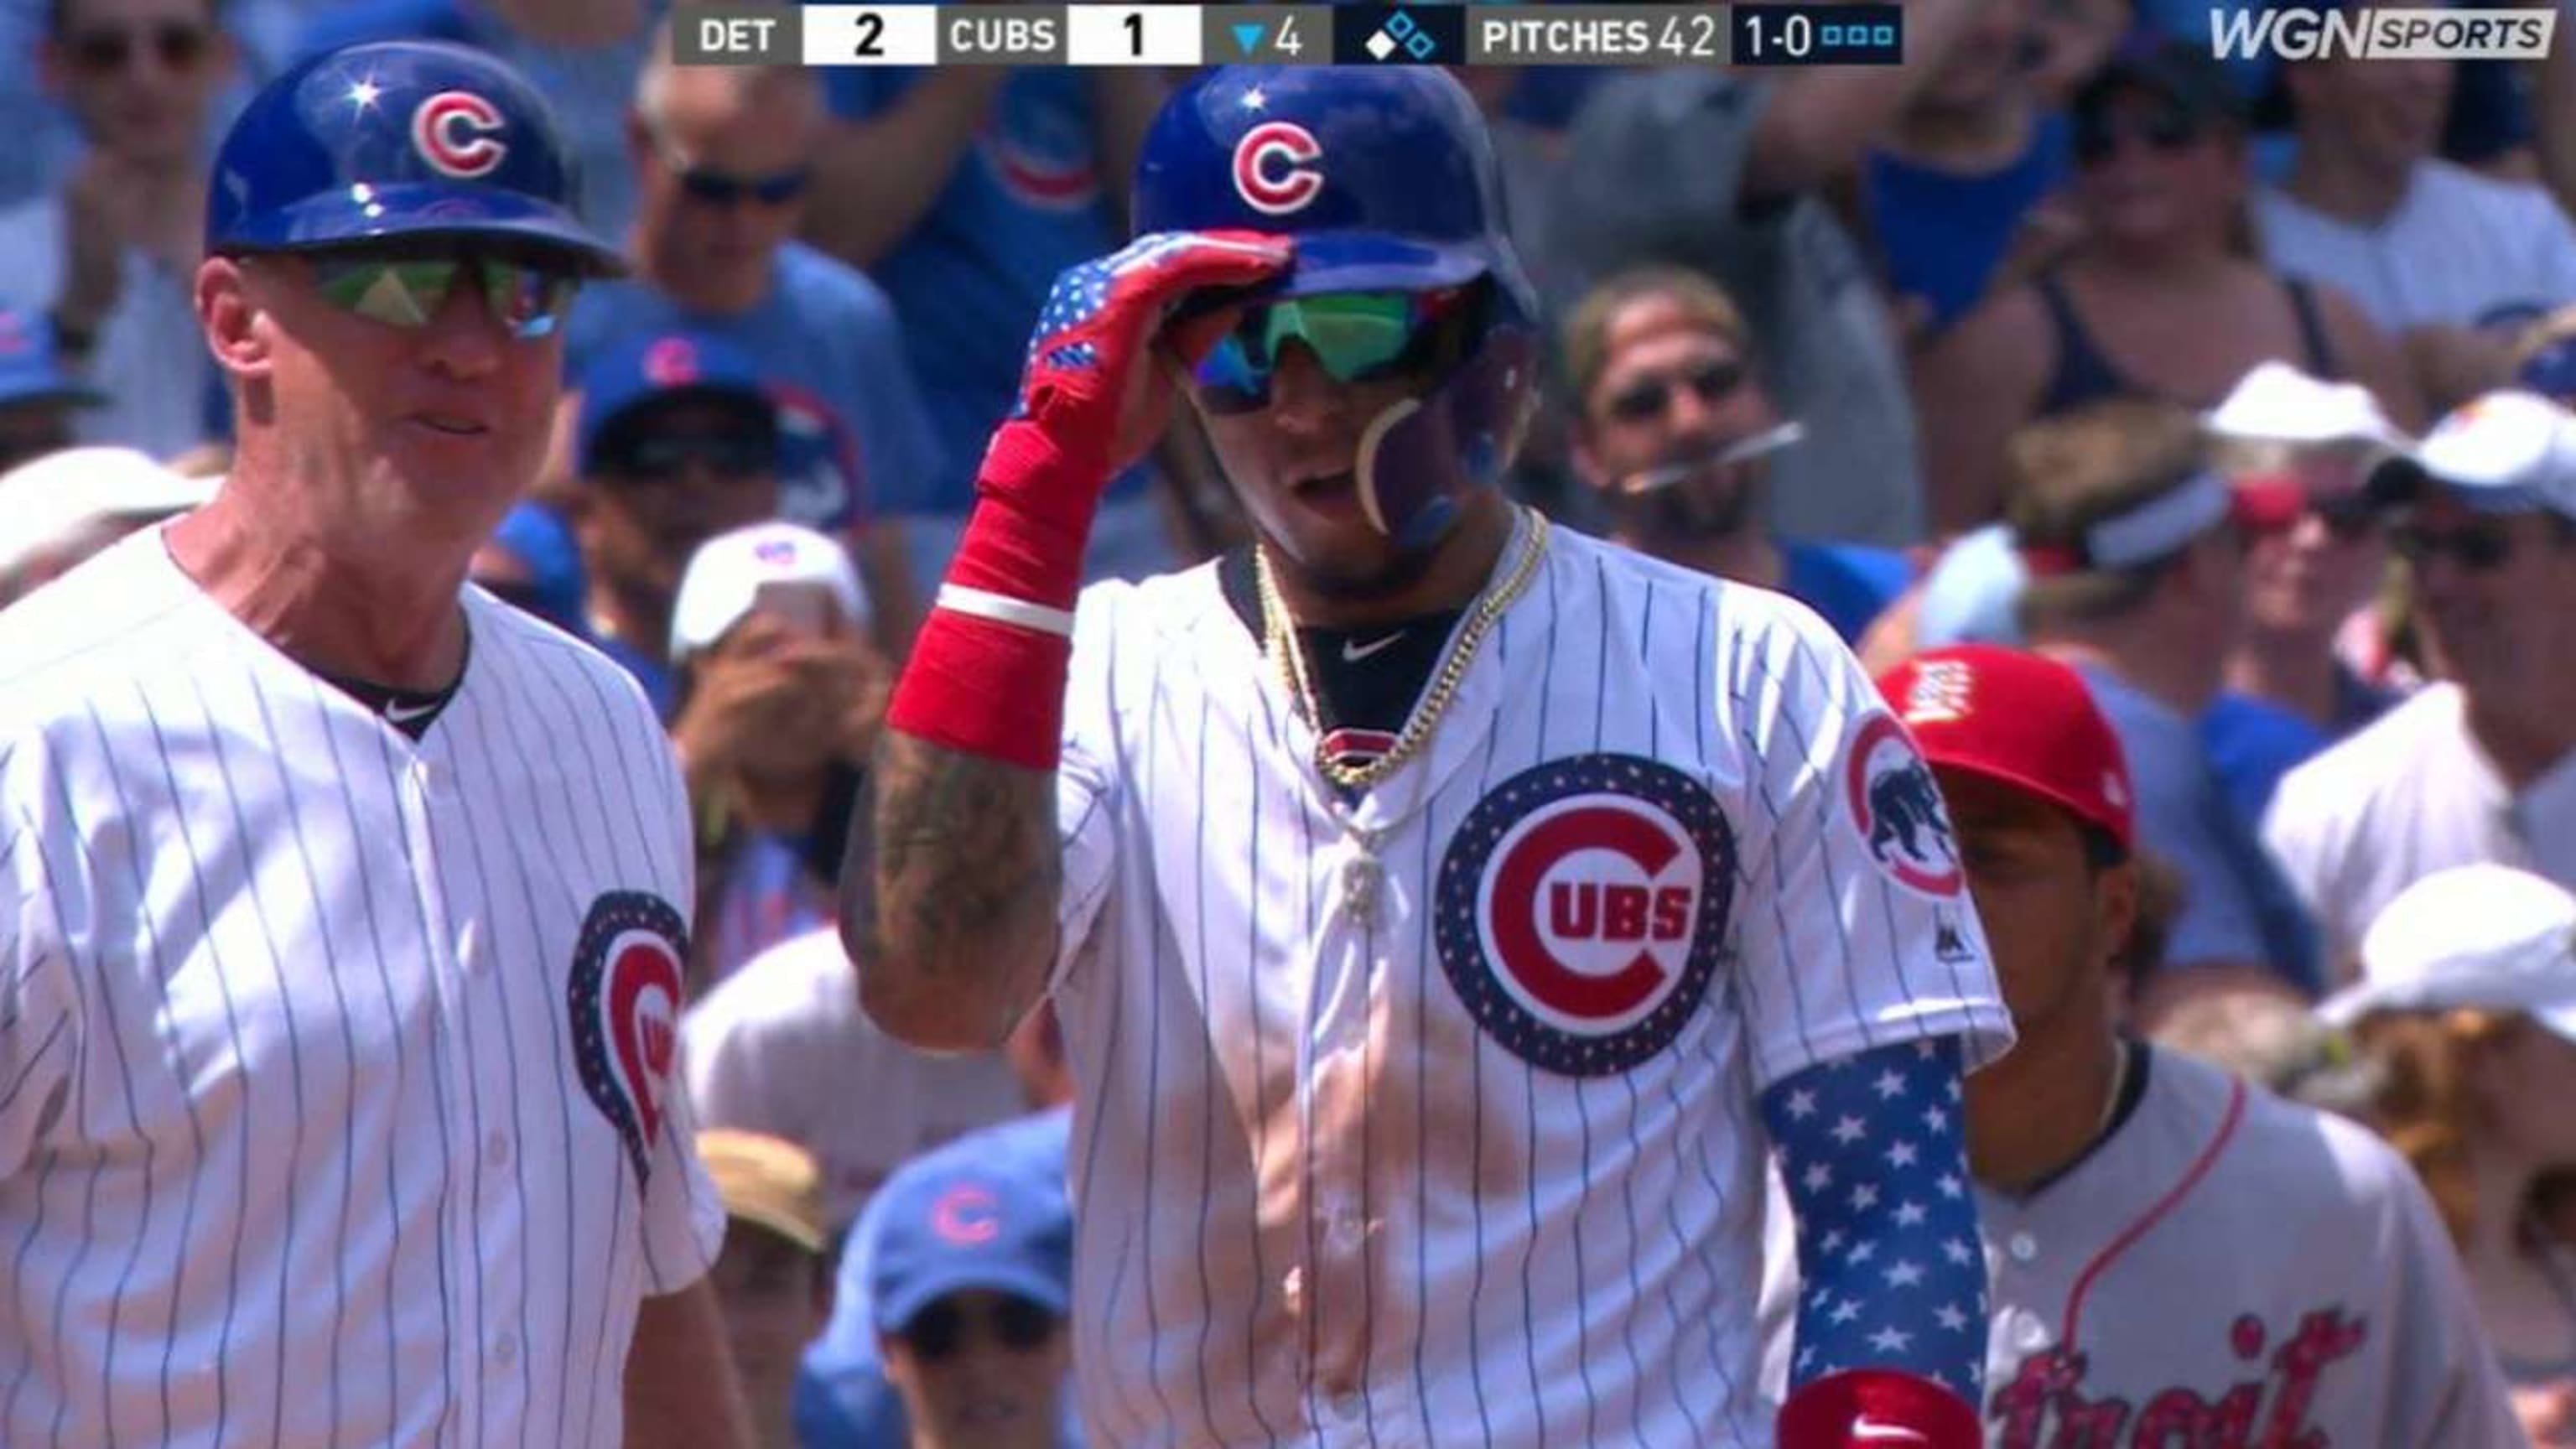 Sexy' steal of home by Javier Baez energizes Cubs during 6th